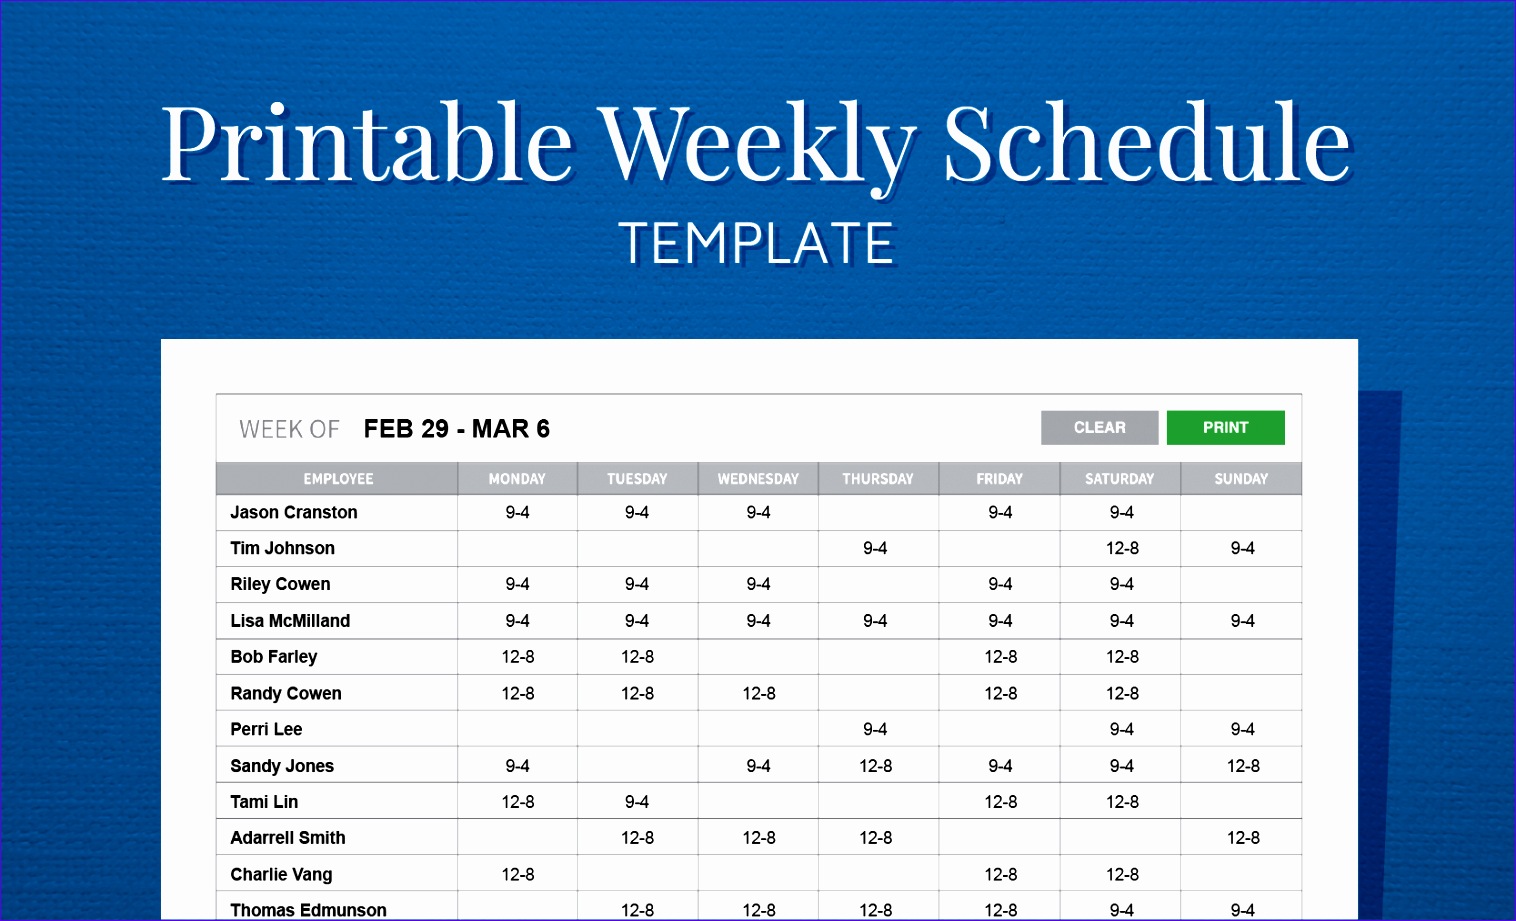 How To Make An Employee Schedule In Excel